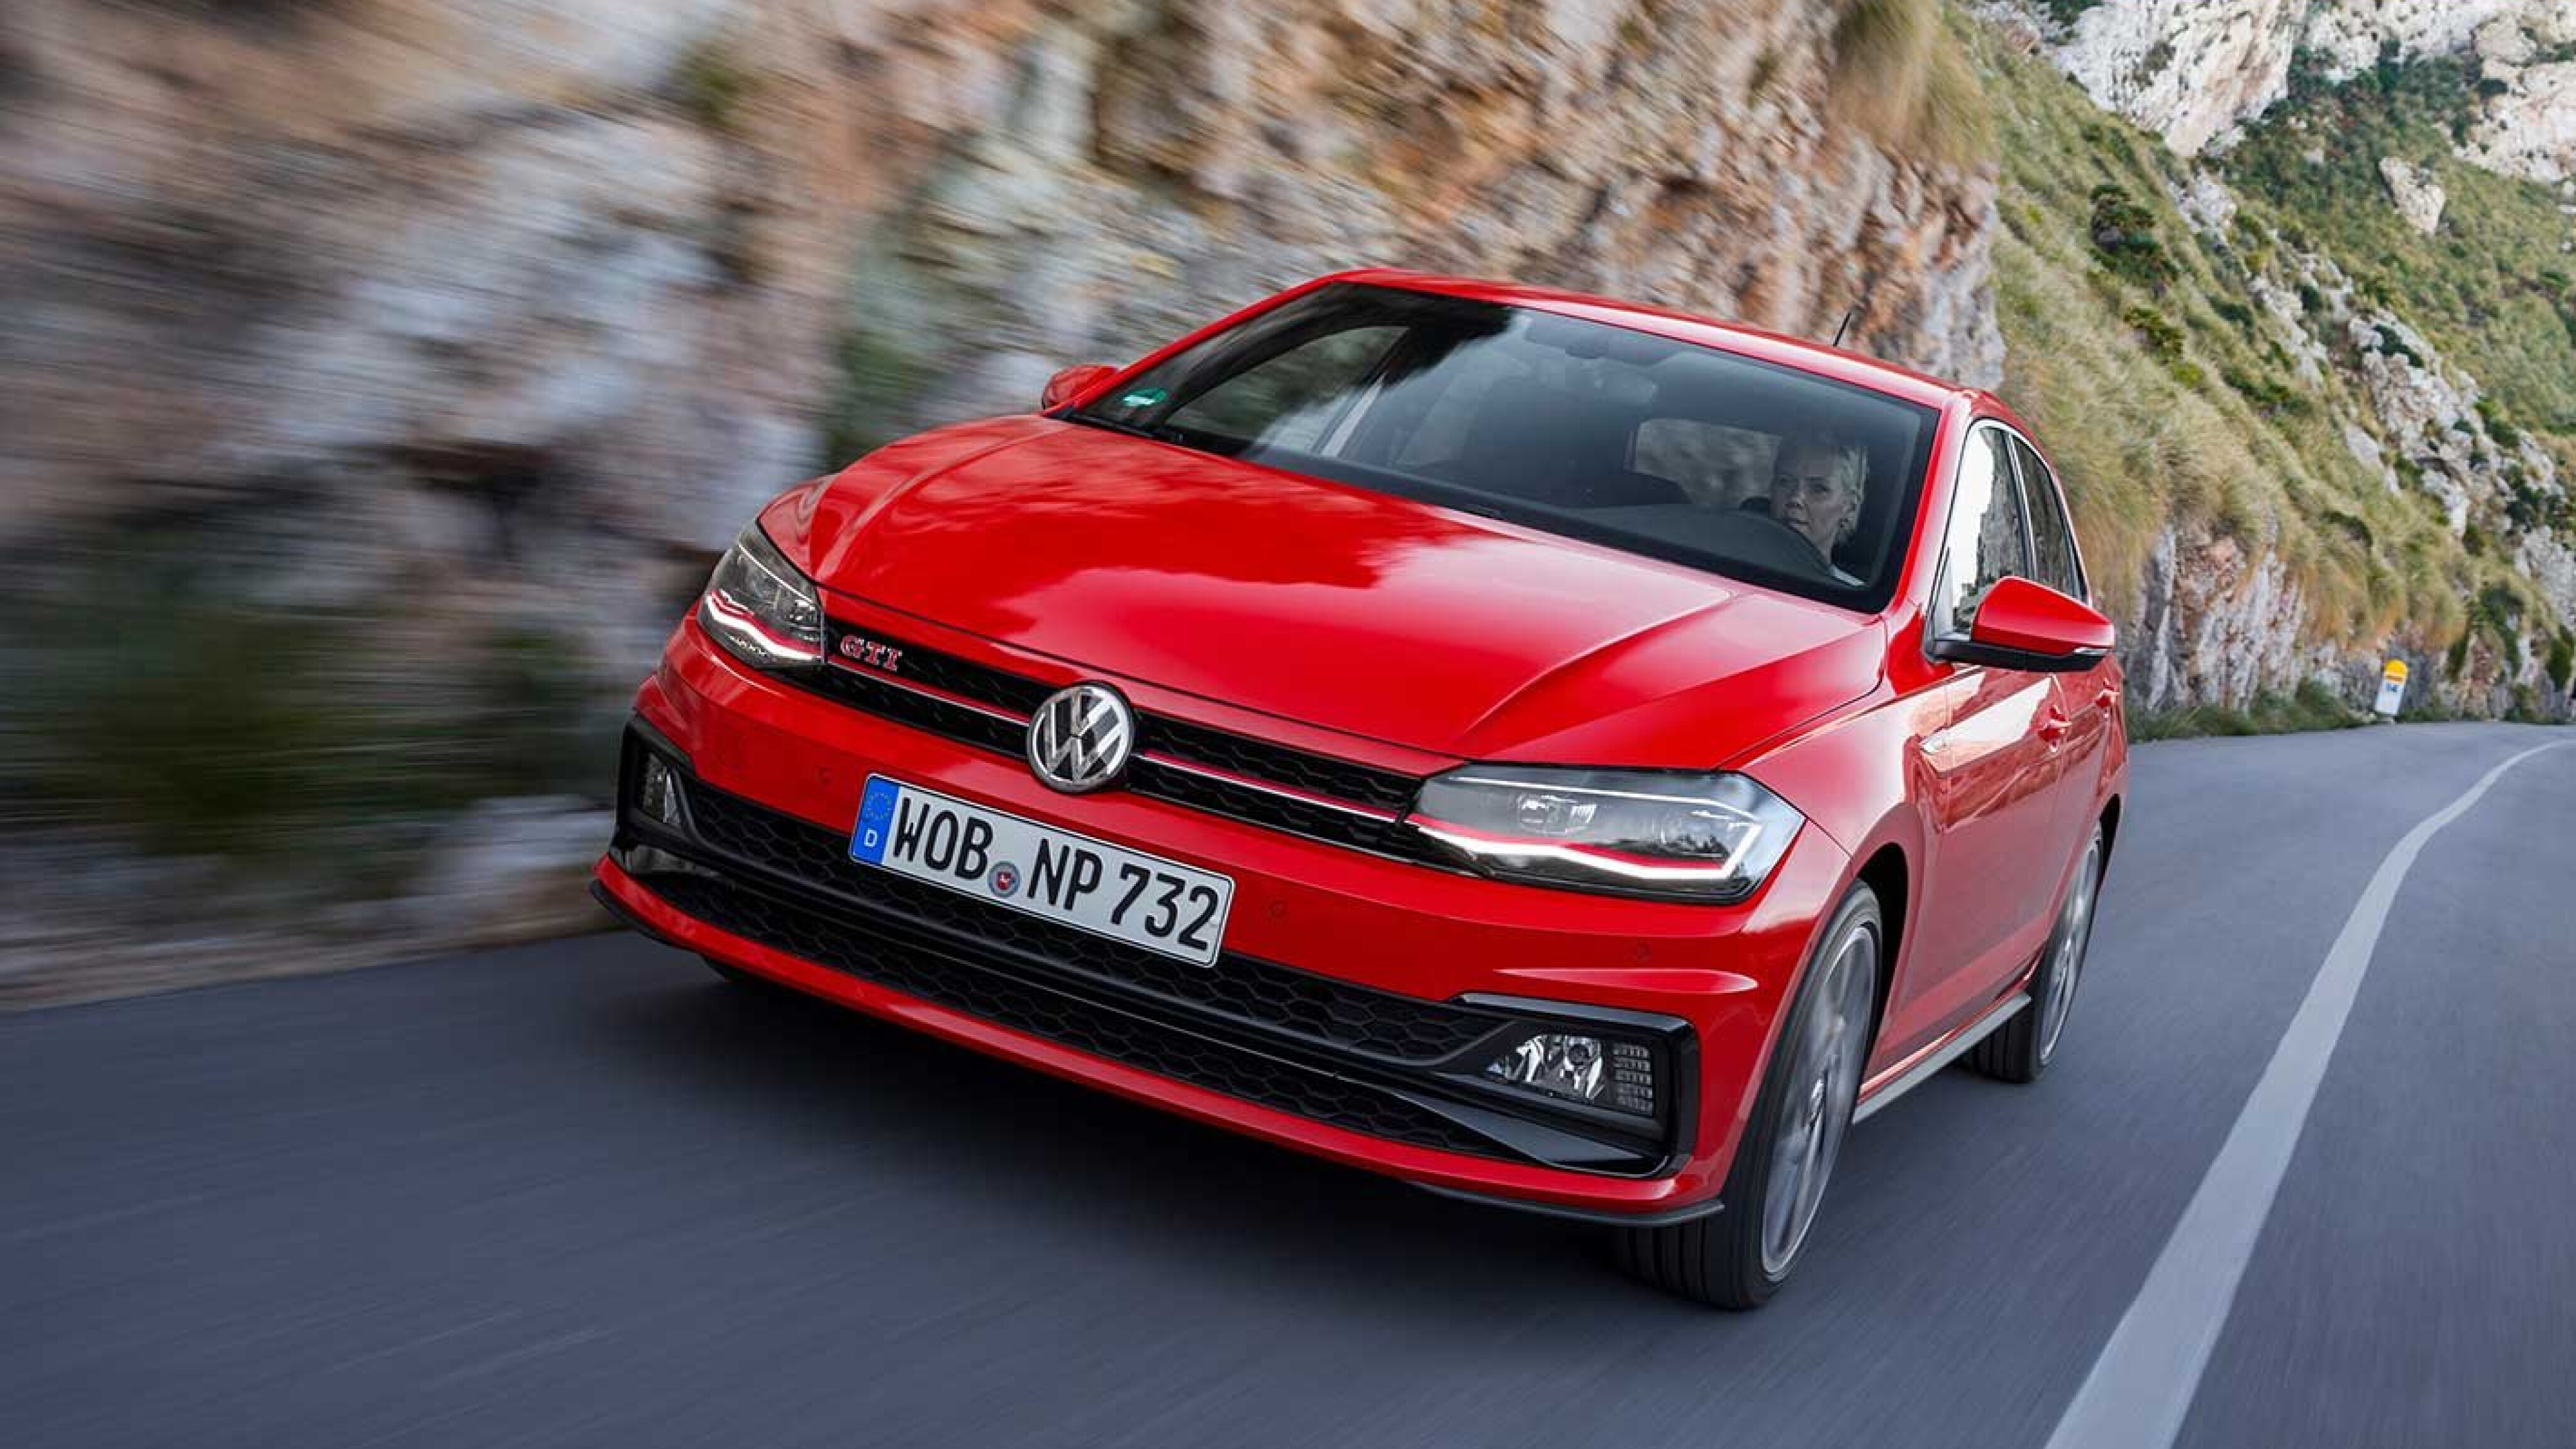 Why the Volkswagen Polo Makes A Great First Car